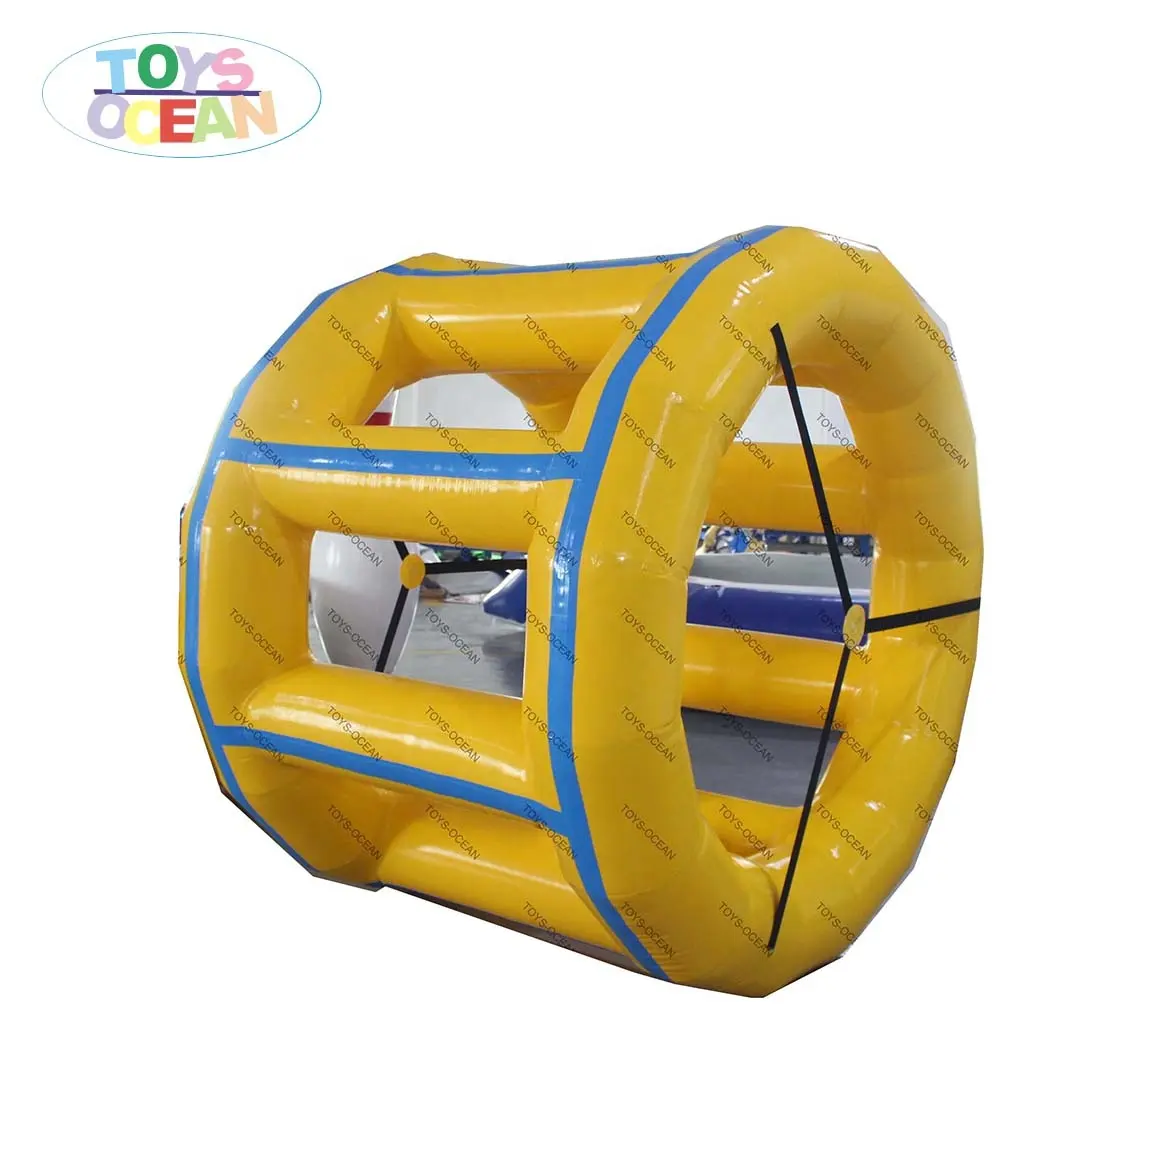 Small water park rides inflatable roller wheel swimming pool water toy